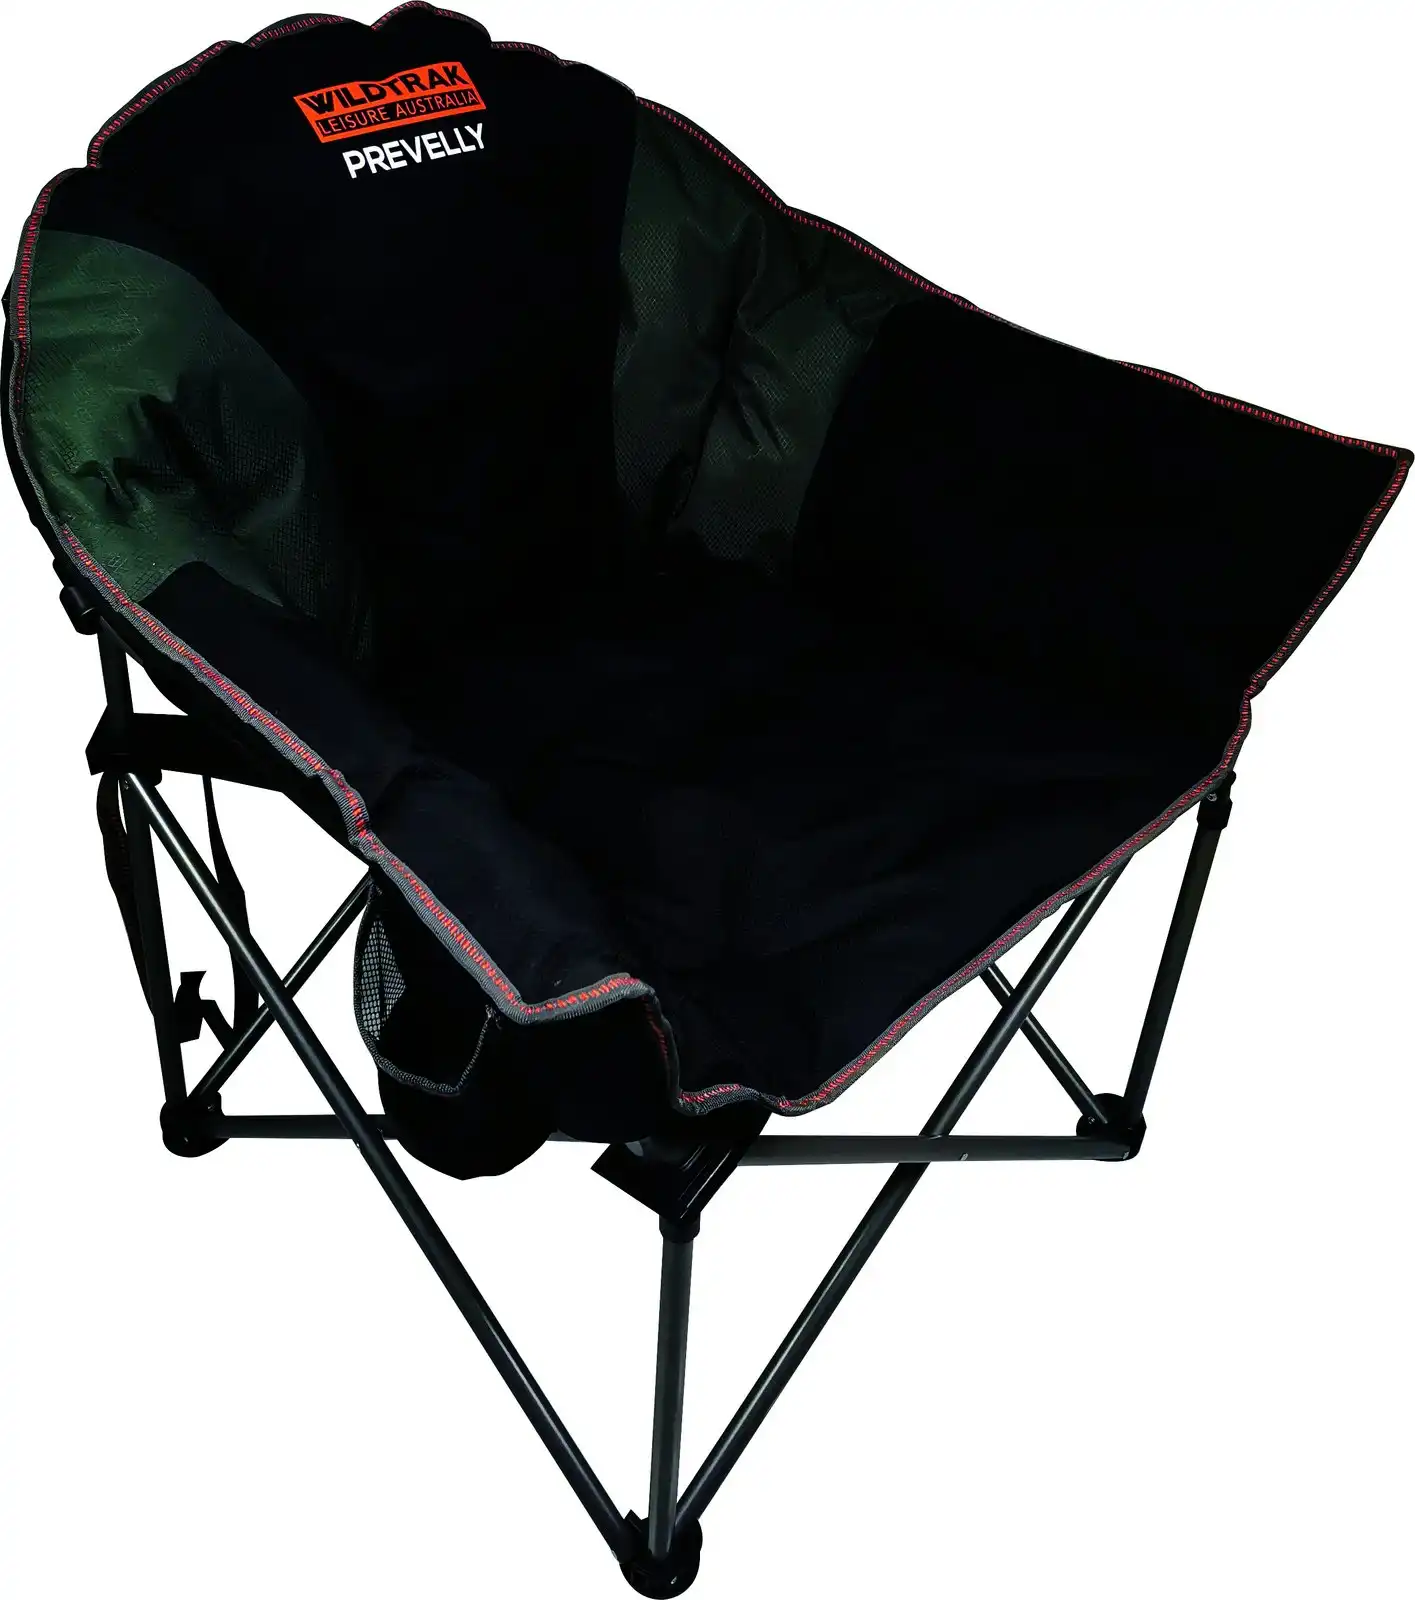 Wildtrak Prevelly 96cm Camp Chair w/ Cup Holder Outdoor Camping Seat Black/Grey